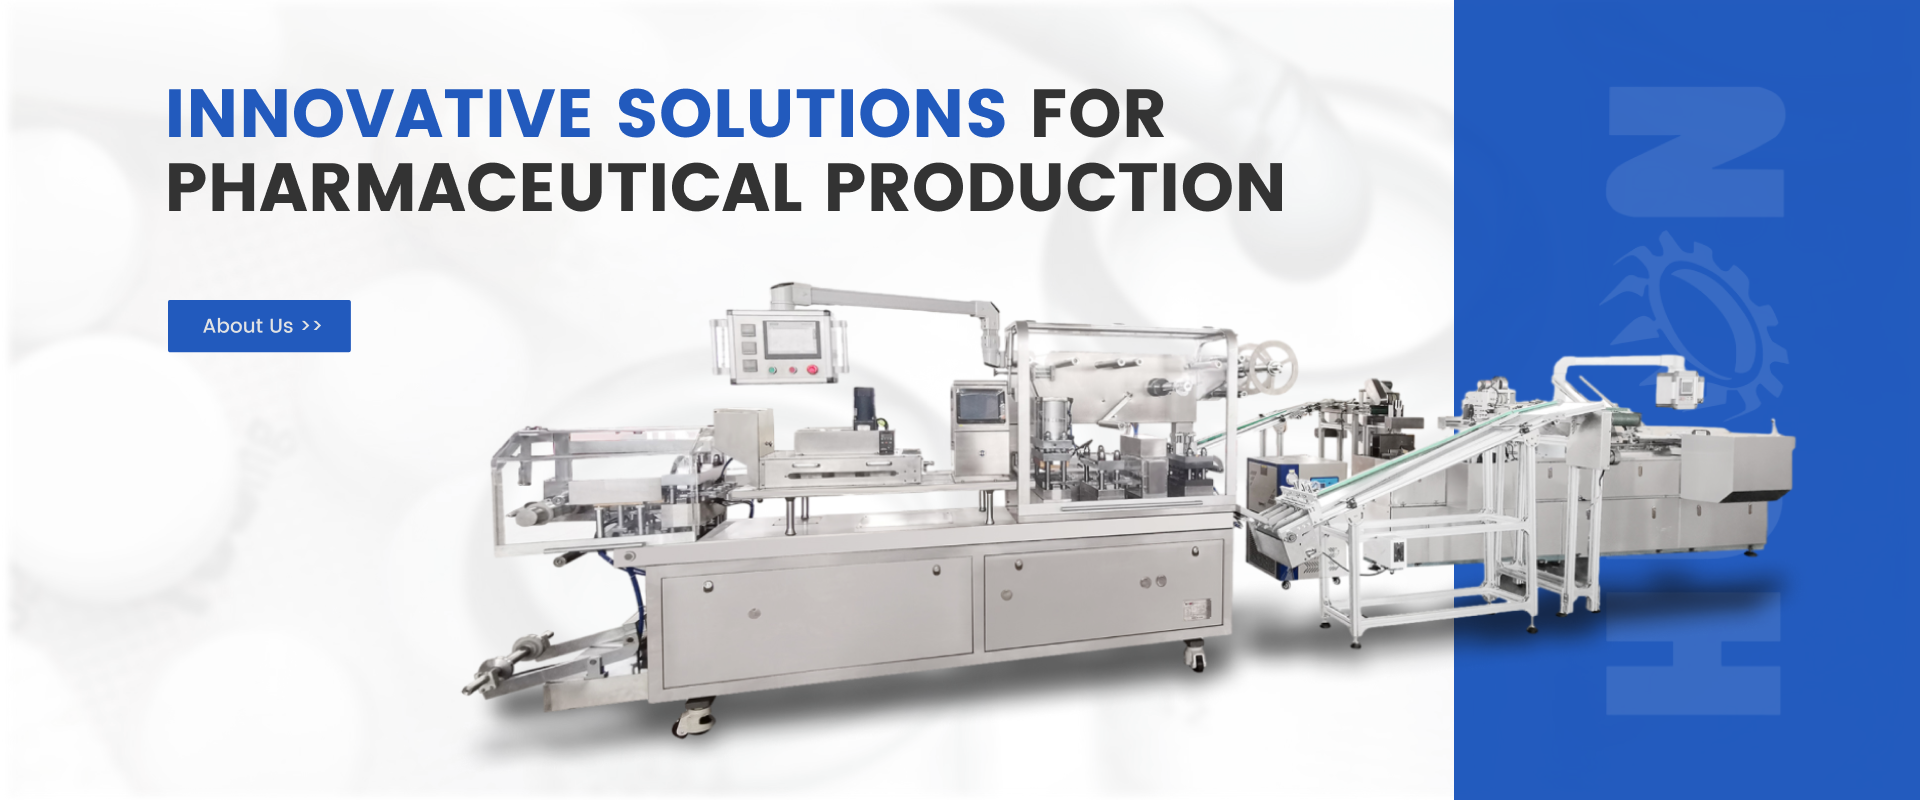 lnnovative Solutions for Pharmaceutical Production